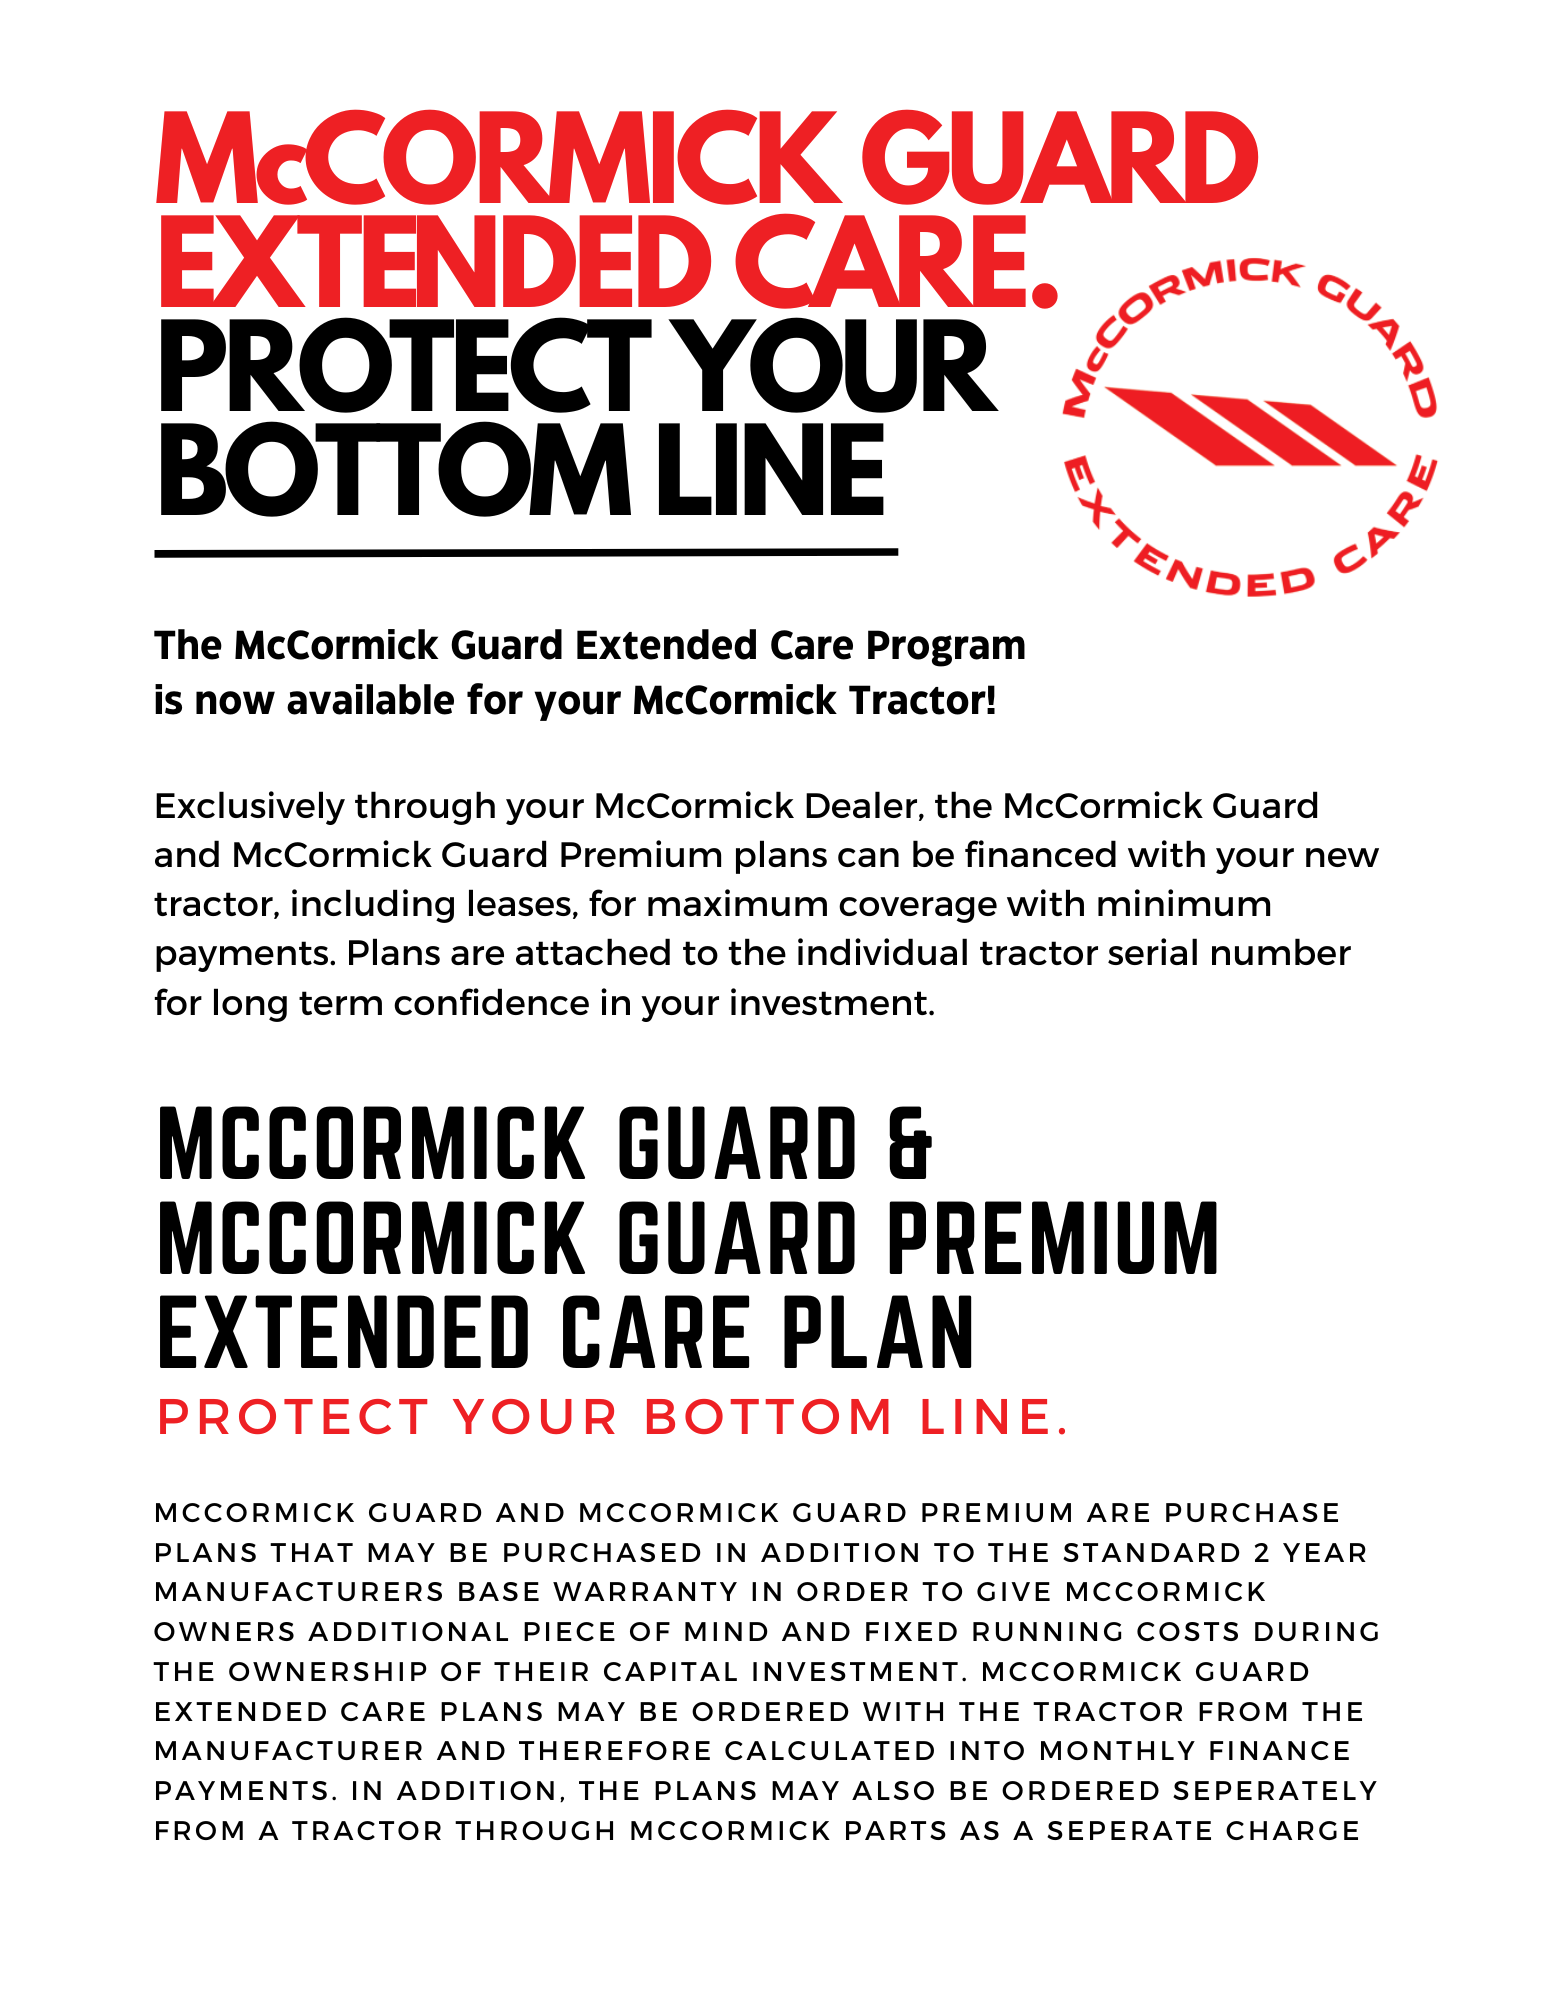 Go to mccormick.it (McCormick-Guard_Customer-Brochure_reduced subpage)